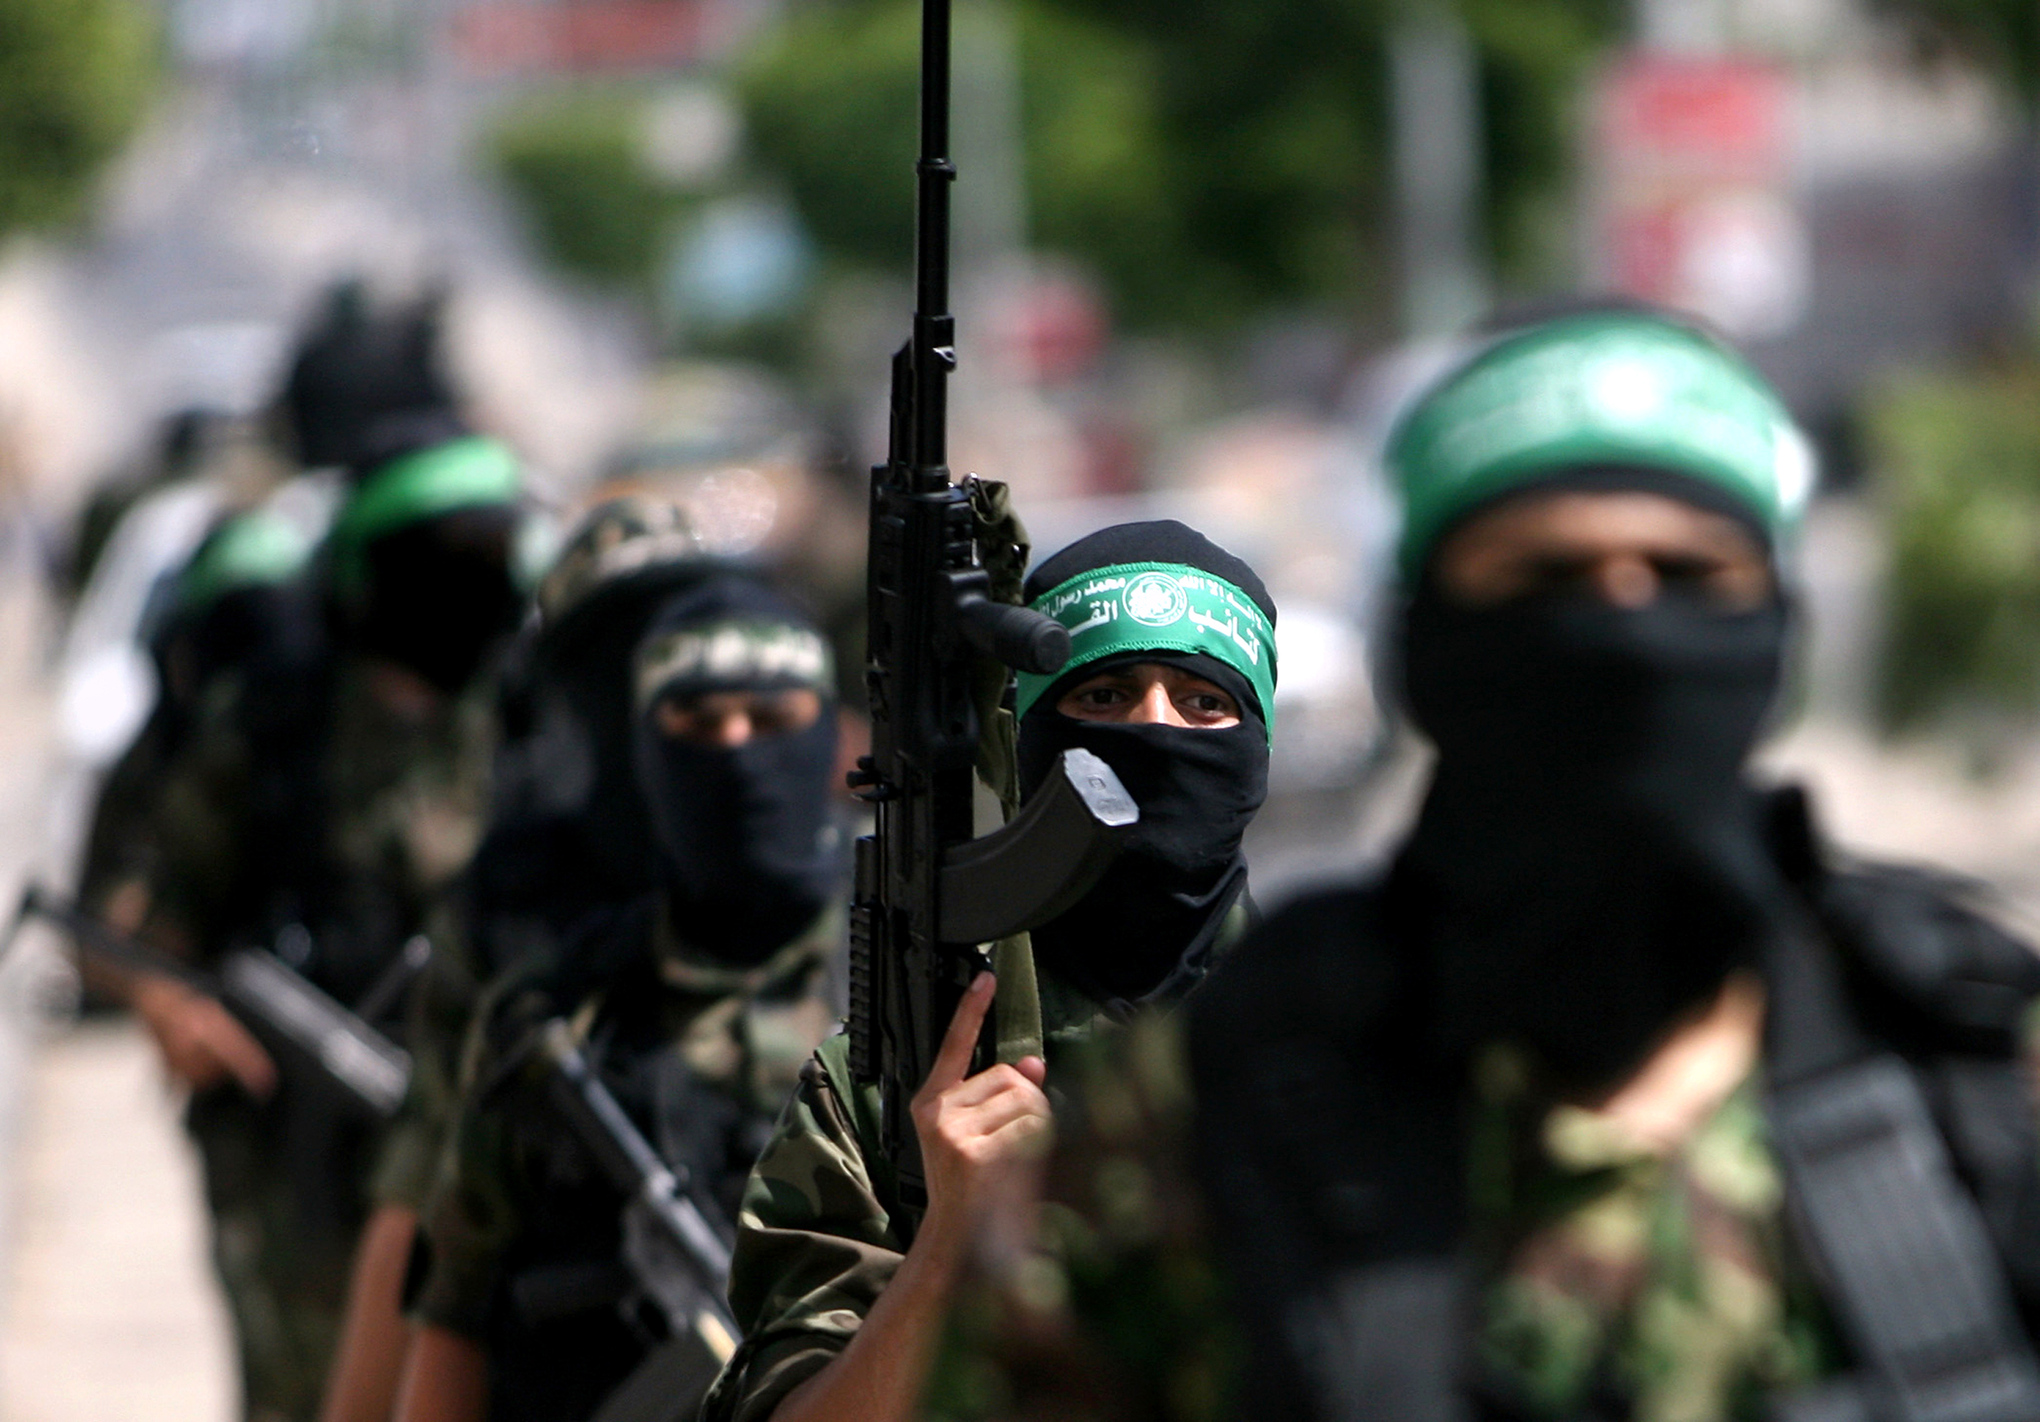 GAZA CITY, GAZA - MAY 29:  Members of the Ezzedine al-Qassam Brigades, Hamas' armed wing, parade in Rafah, southern Gaza Strip, on May 29, 2014. Palestinian President Mahmoud Abbas on Thursday officially asked Rami Hamdallah, who is currently serving as premier within the West Bank-based government, to form a new national unity government. Last month, Hamas, which rules the Gaza Strip, and Fatah, which rules the occupied West Bank, hammered out a reconciliation deal with a view to ending the rifts that have marred their relations since 2007. (Photo by Eyad Al Baba/Anadolu Agency/Getty Images)